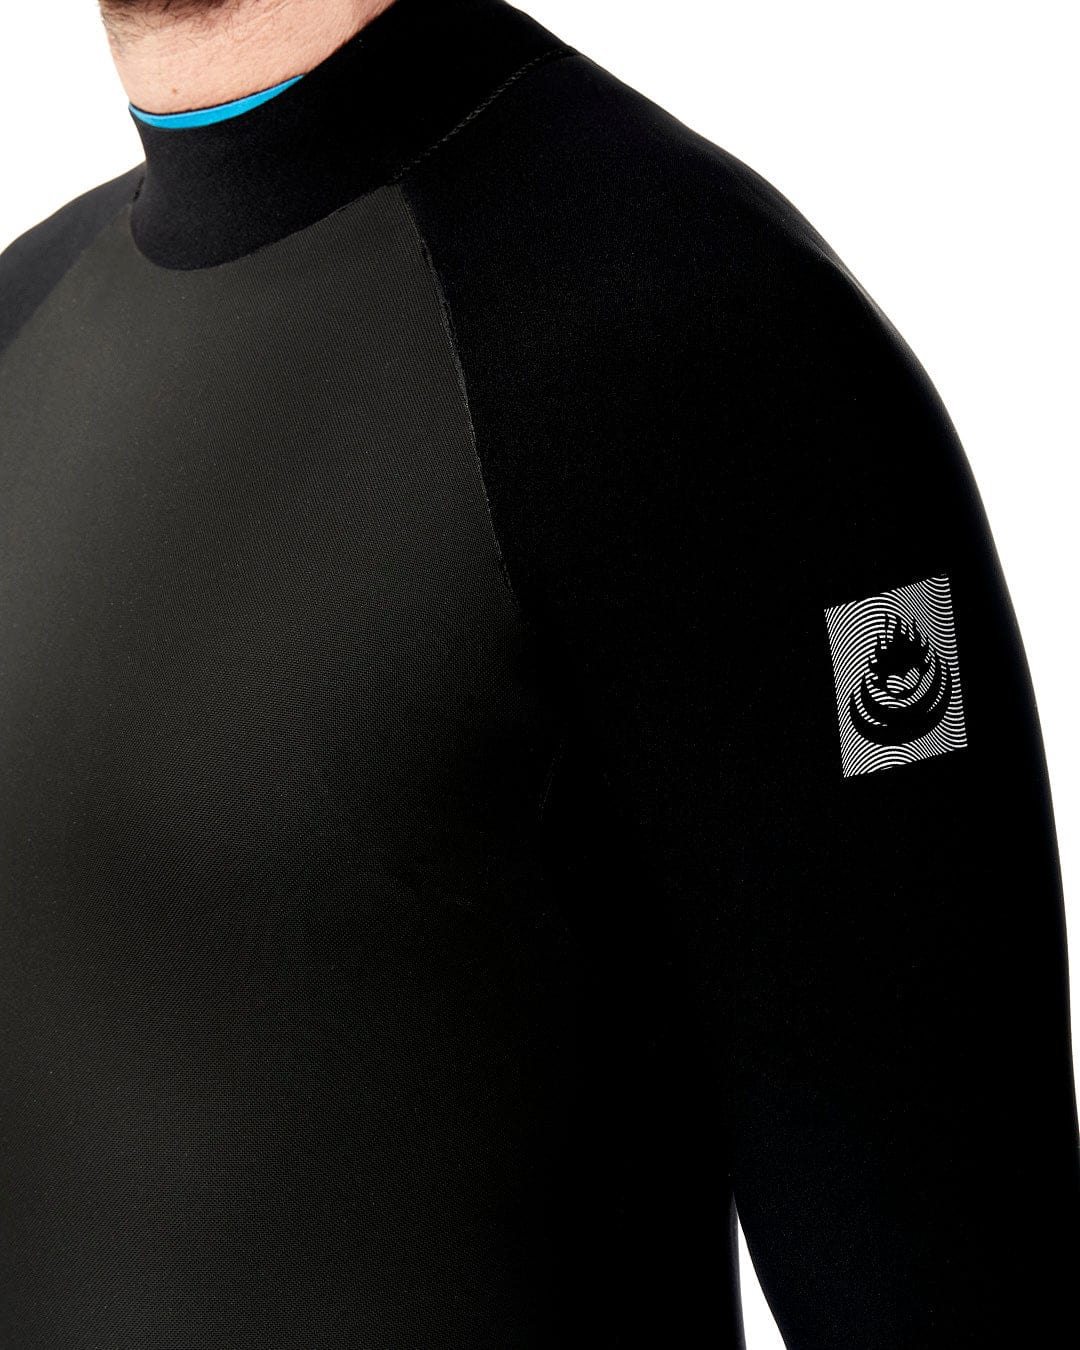 A man is wearing a Saltrock Synthesis - Mens 4/3 Back Zip Full Wetsuit - Black.